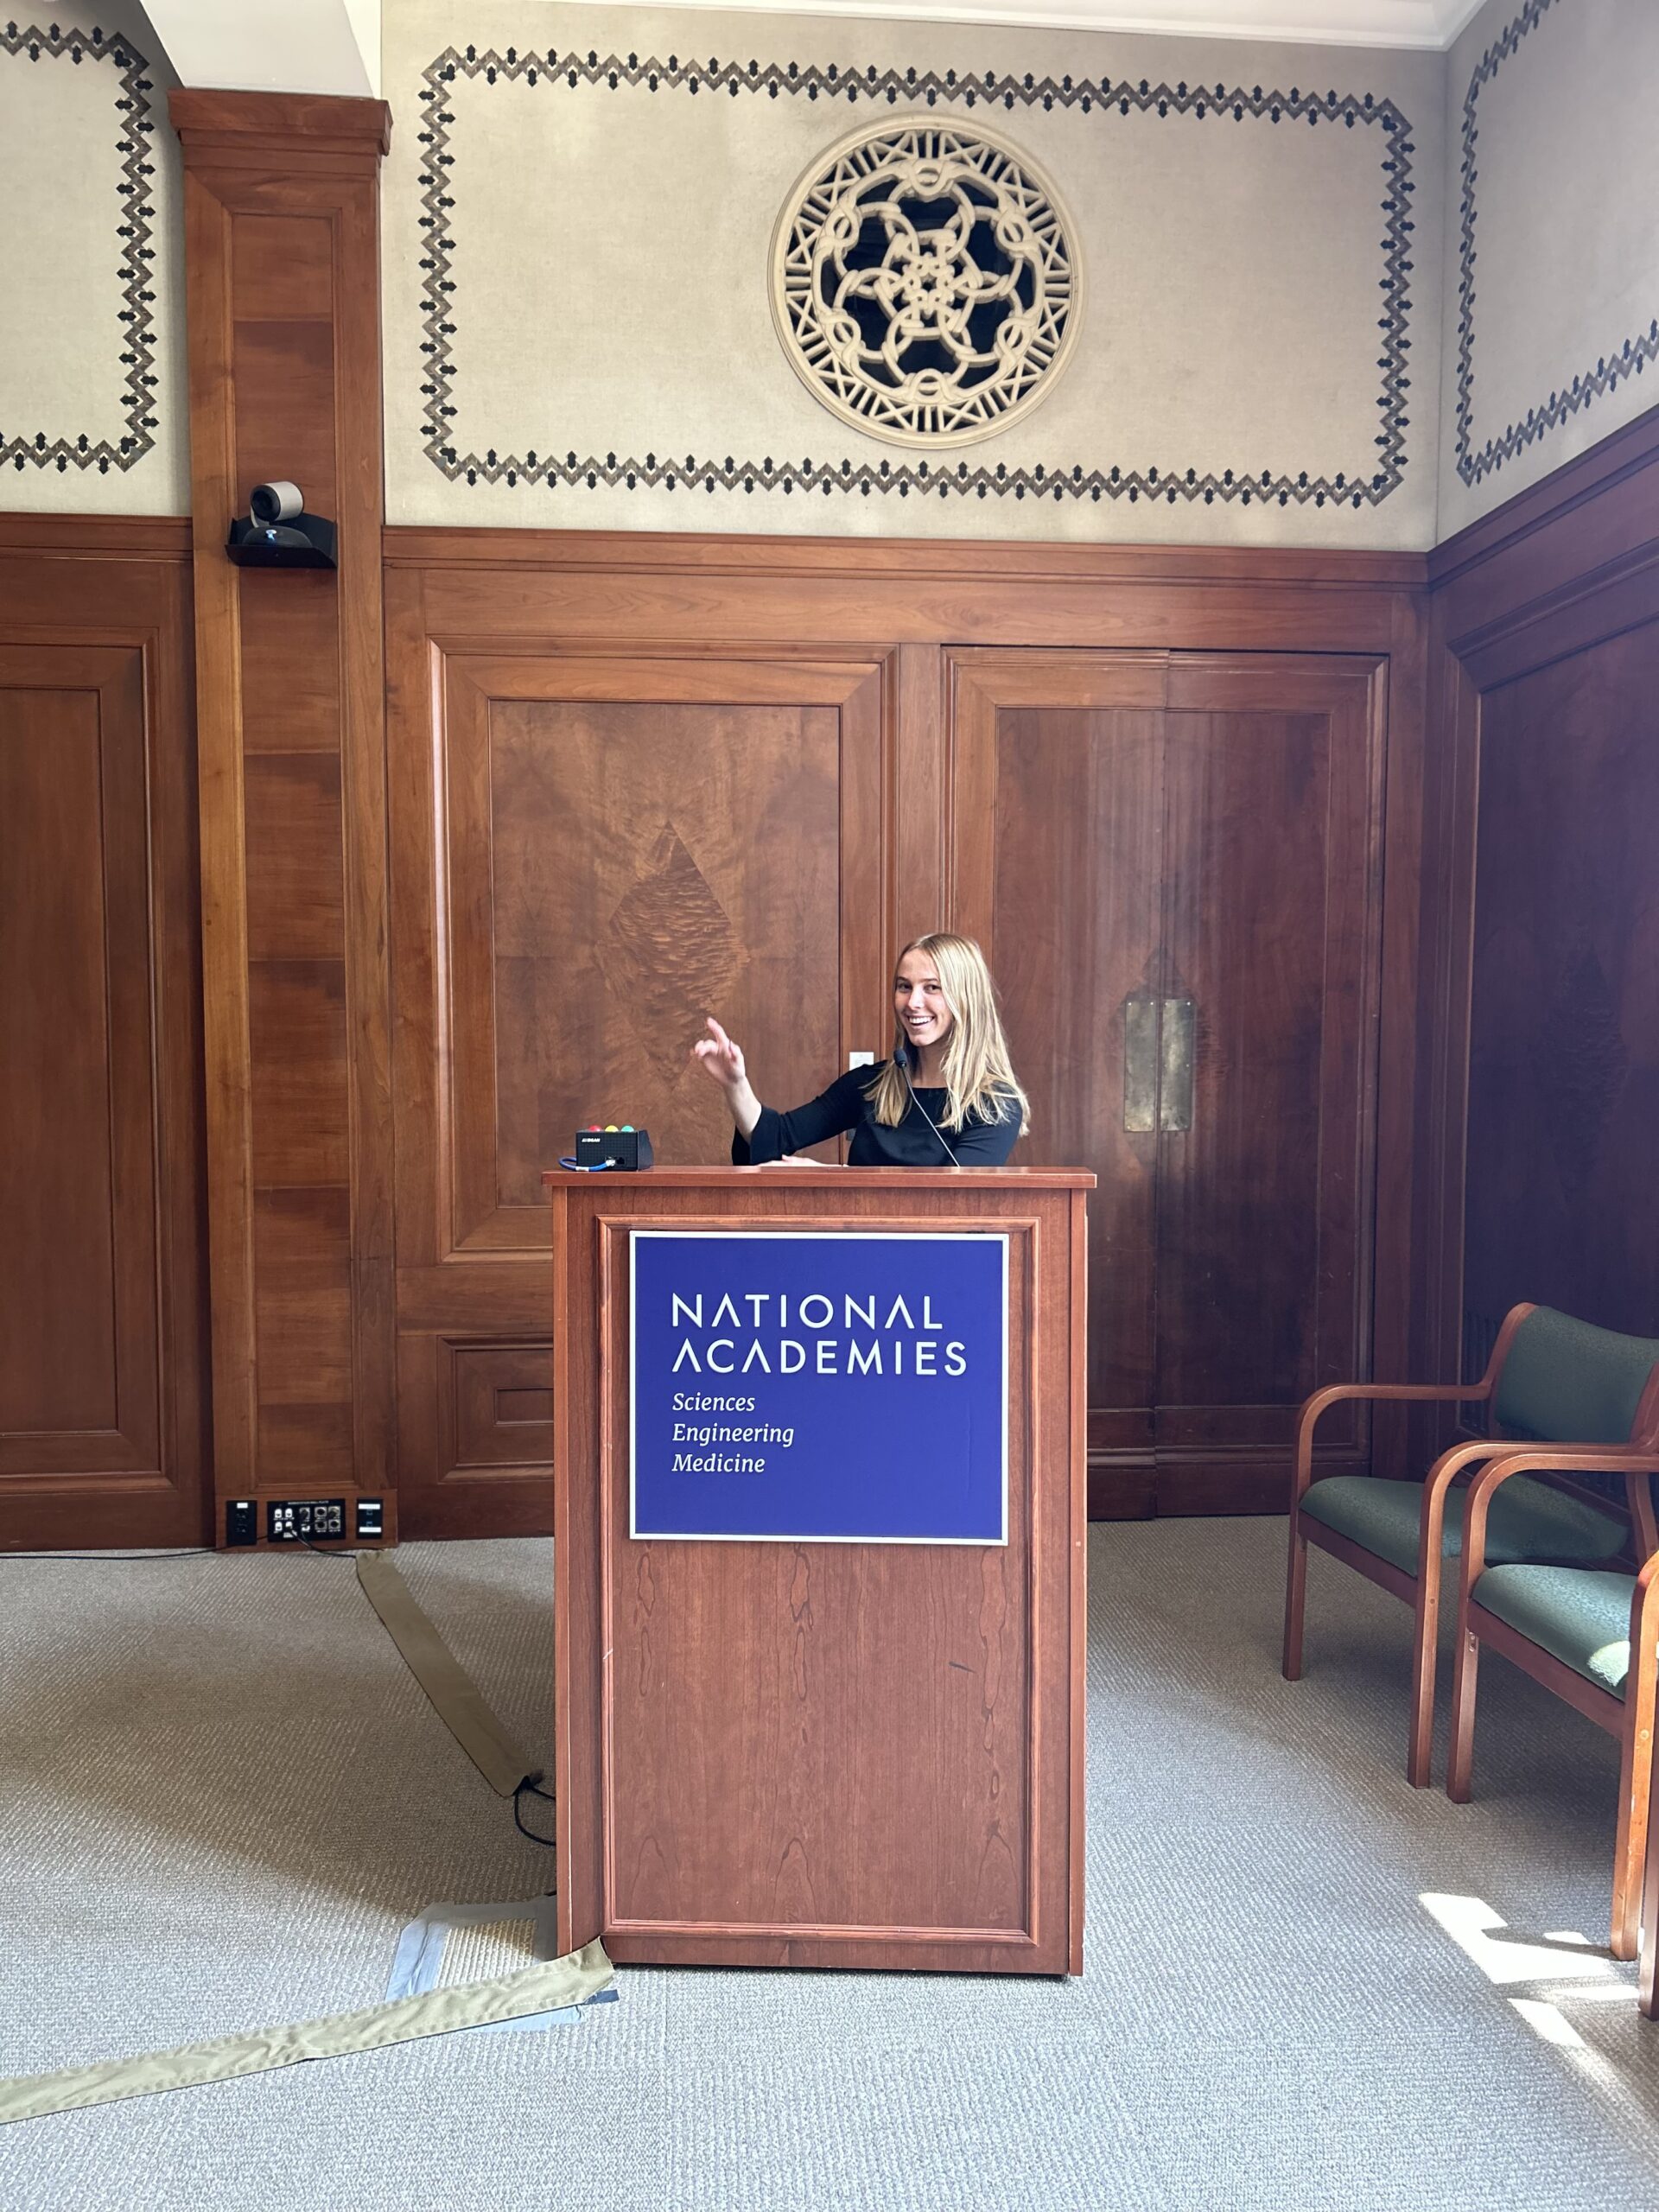 Sarah Cole touring the national academies of sciences